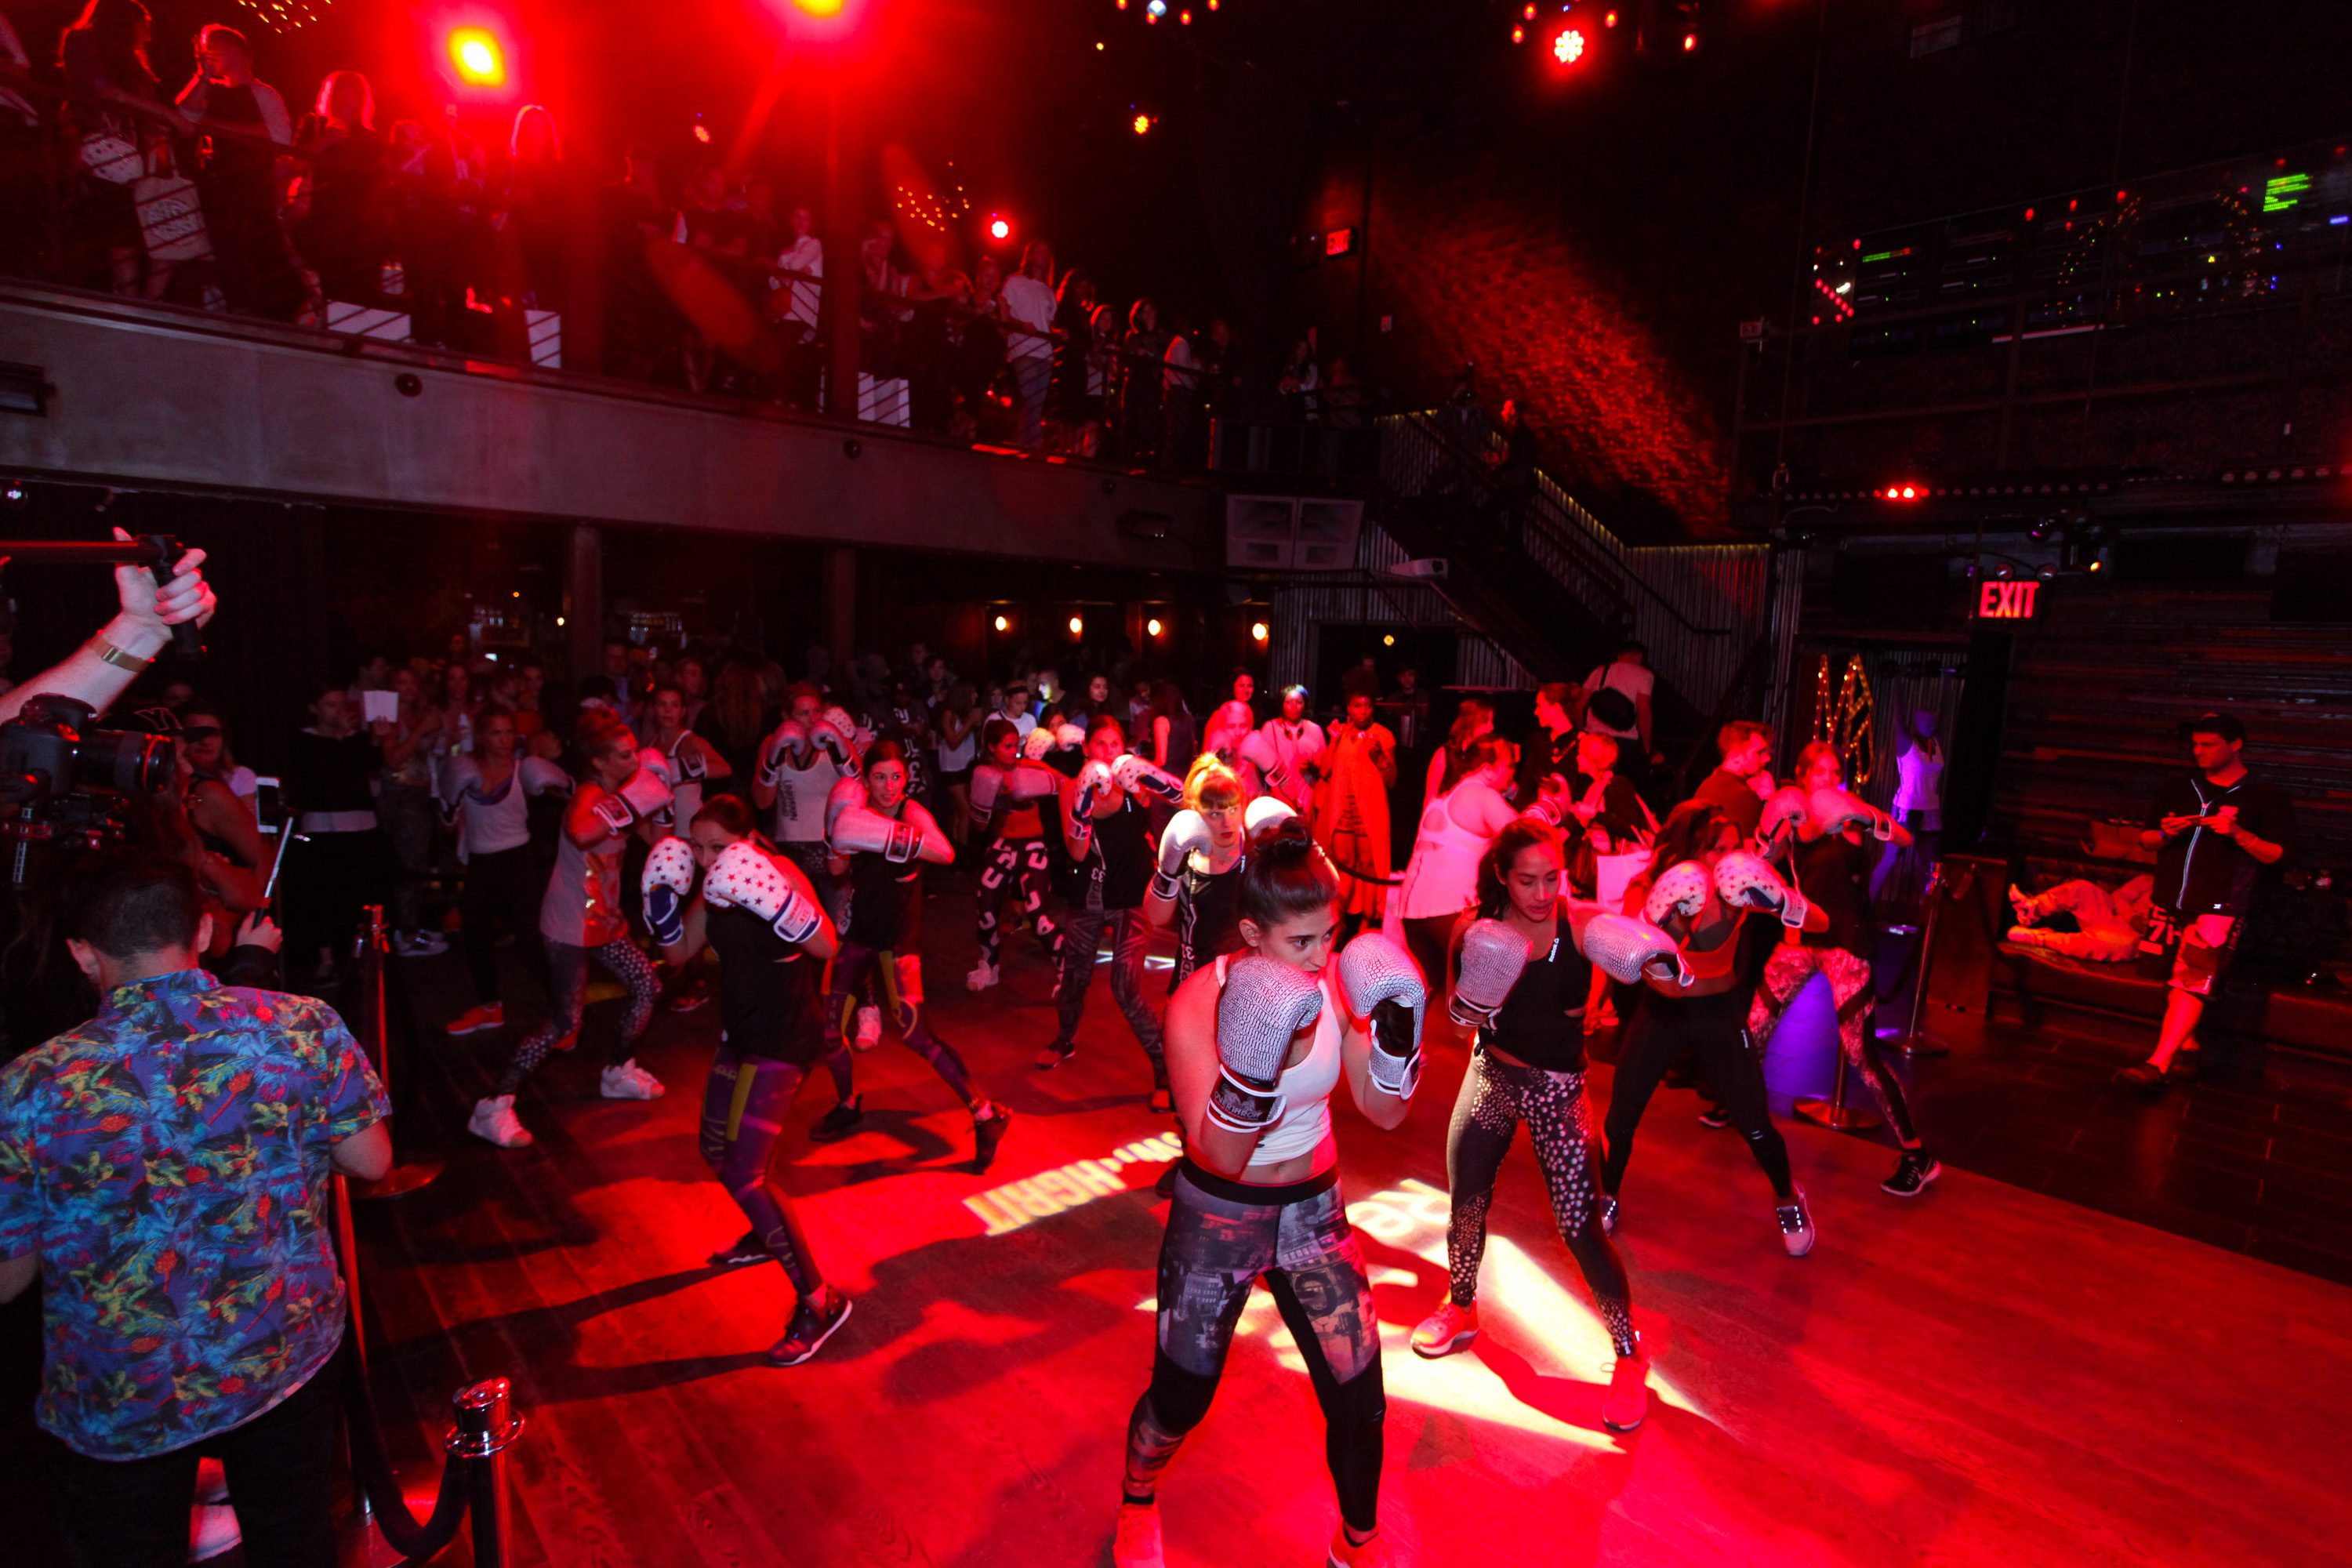 NEW YORK, NY - SEPTEMBER 16: Guests participate in the Ultimate Boxing Overthrow Class at Marquee on September 16, 2015 in New York City. (Photo by Donald Bowers/Getty Images for Reebok)